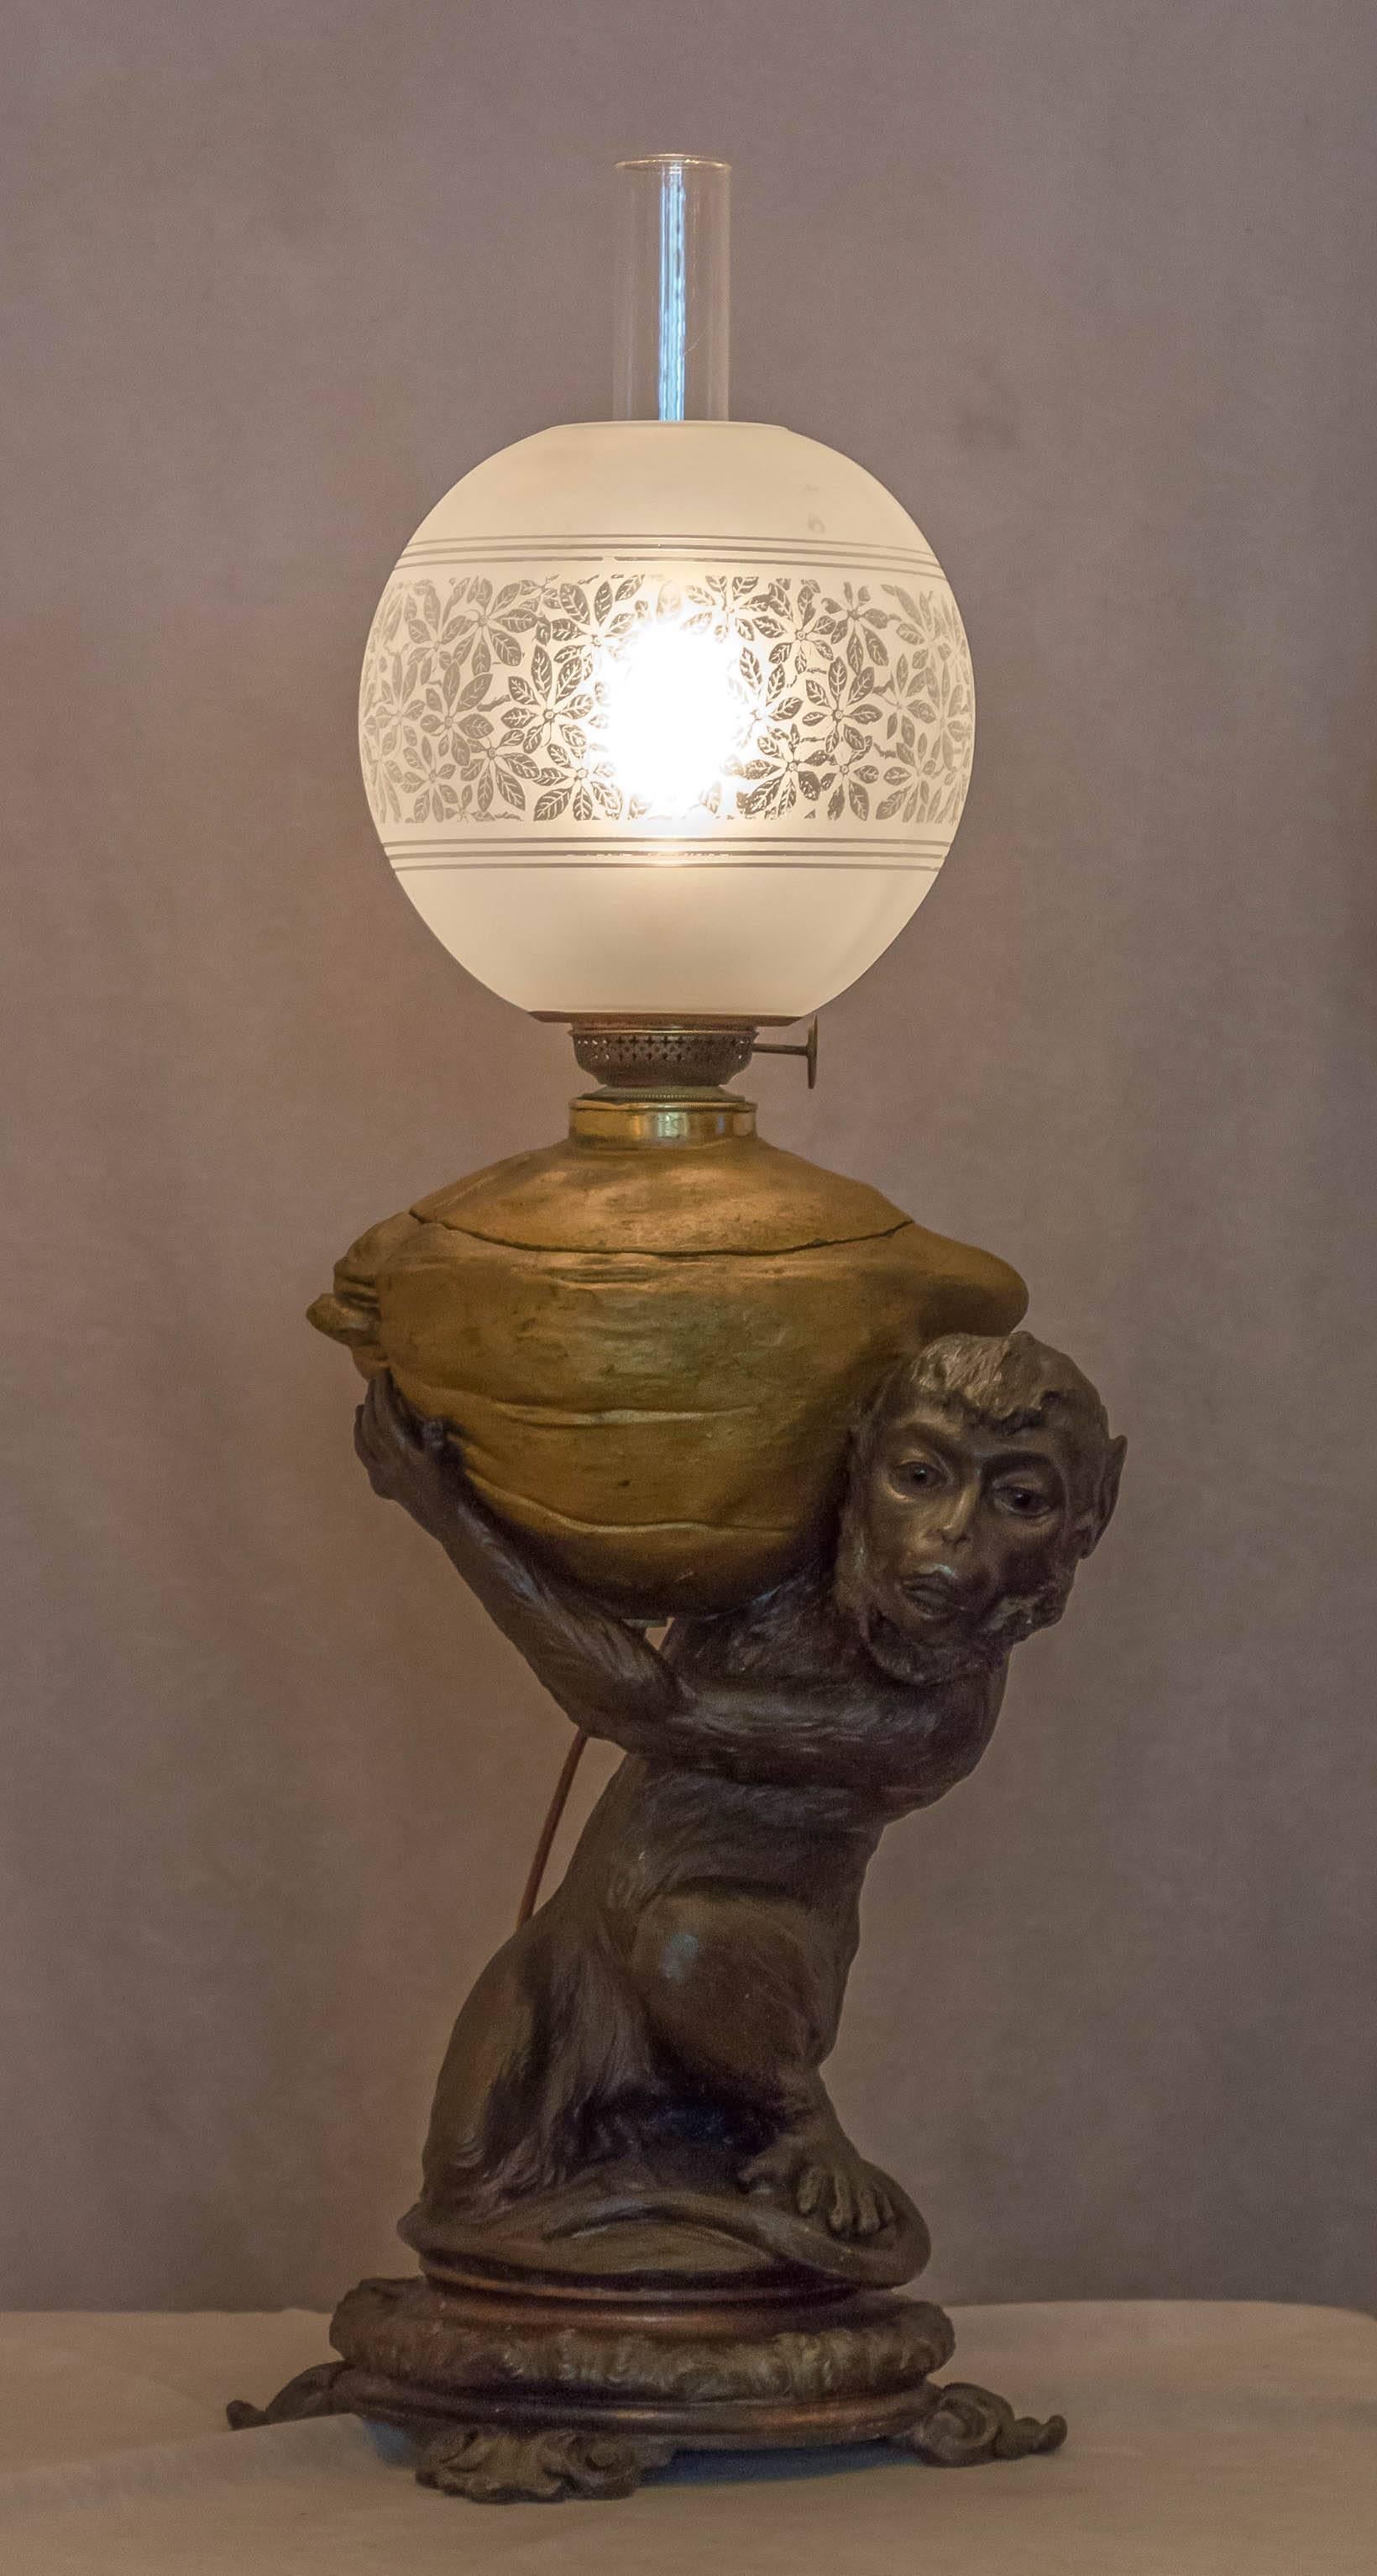 We do have a weakness for the whimsy, hence the monkey and coconut lamp. This lamp is so much fun and now can be used without adding oil, as it has been electrified. As an added quality characteristic, the monkey's eyes are glass. The shade is an